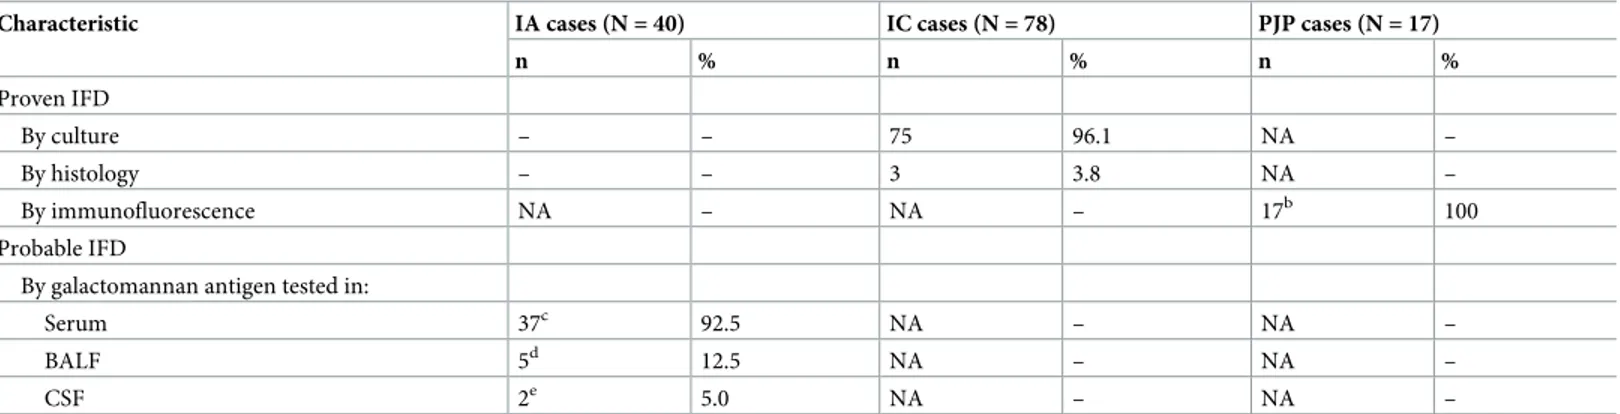 Table 2. Mycological characteristics of IFD cases a .